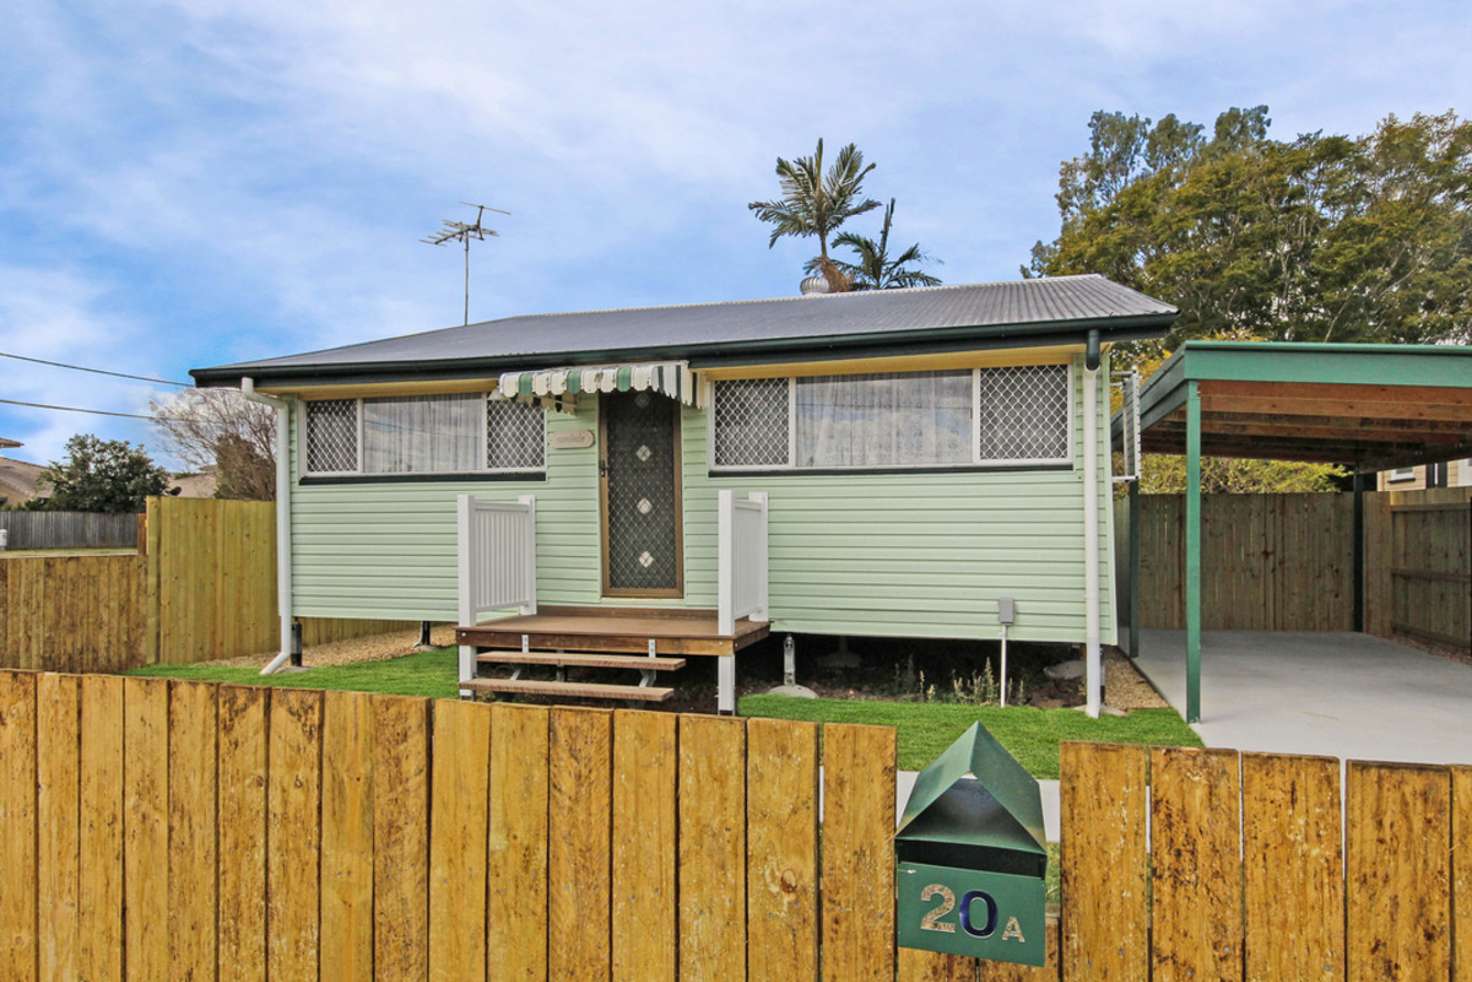 Main view of Homely house listing, 20a Workshops Street, Brassall QLD 4305